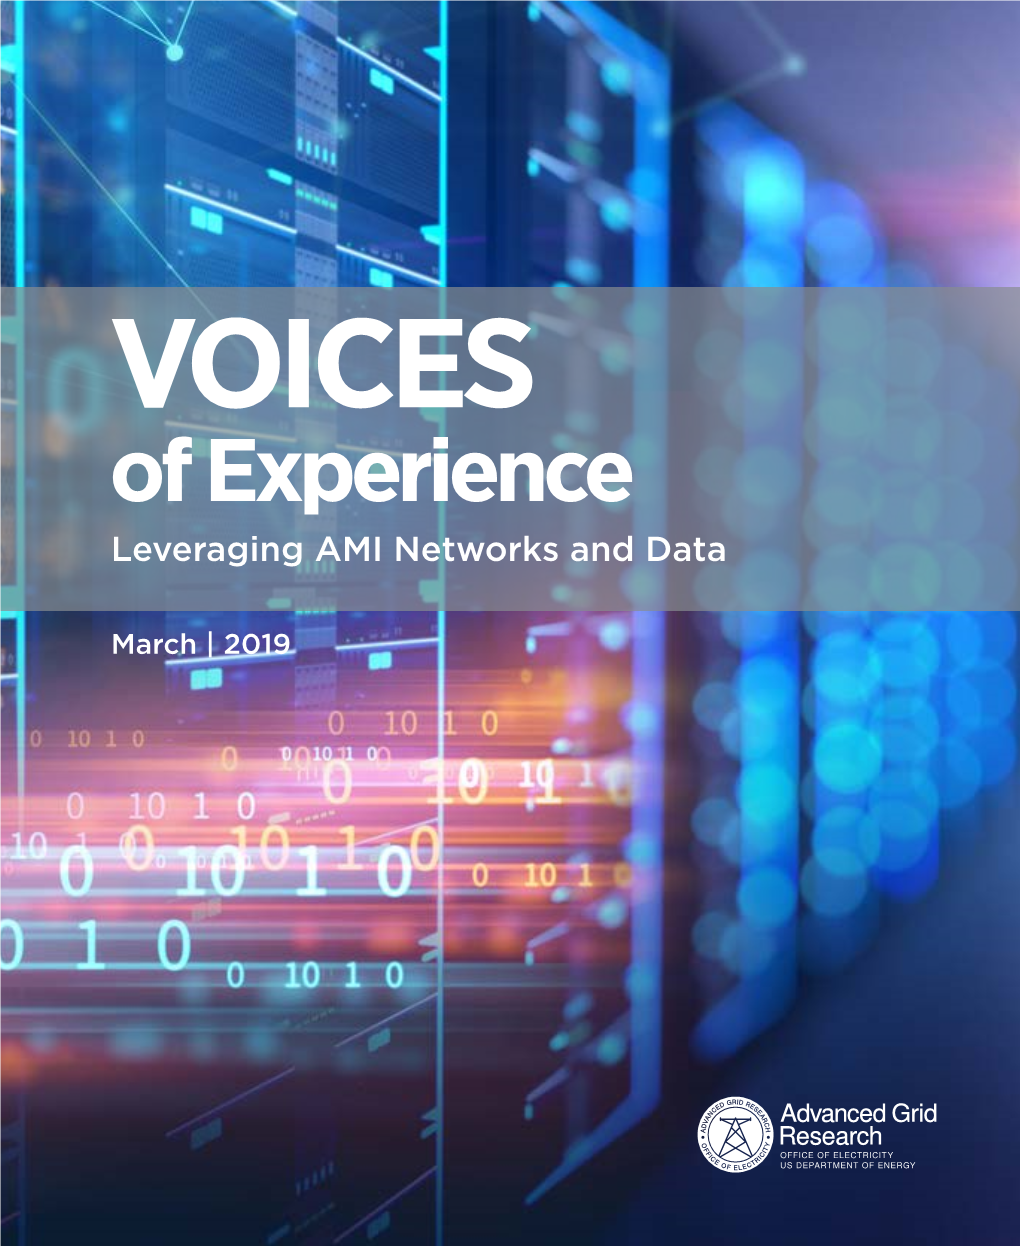 Voice of Experience | Leveraging AMI Networks and Data